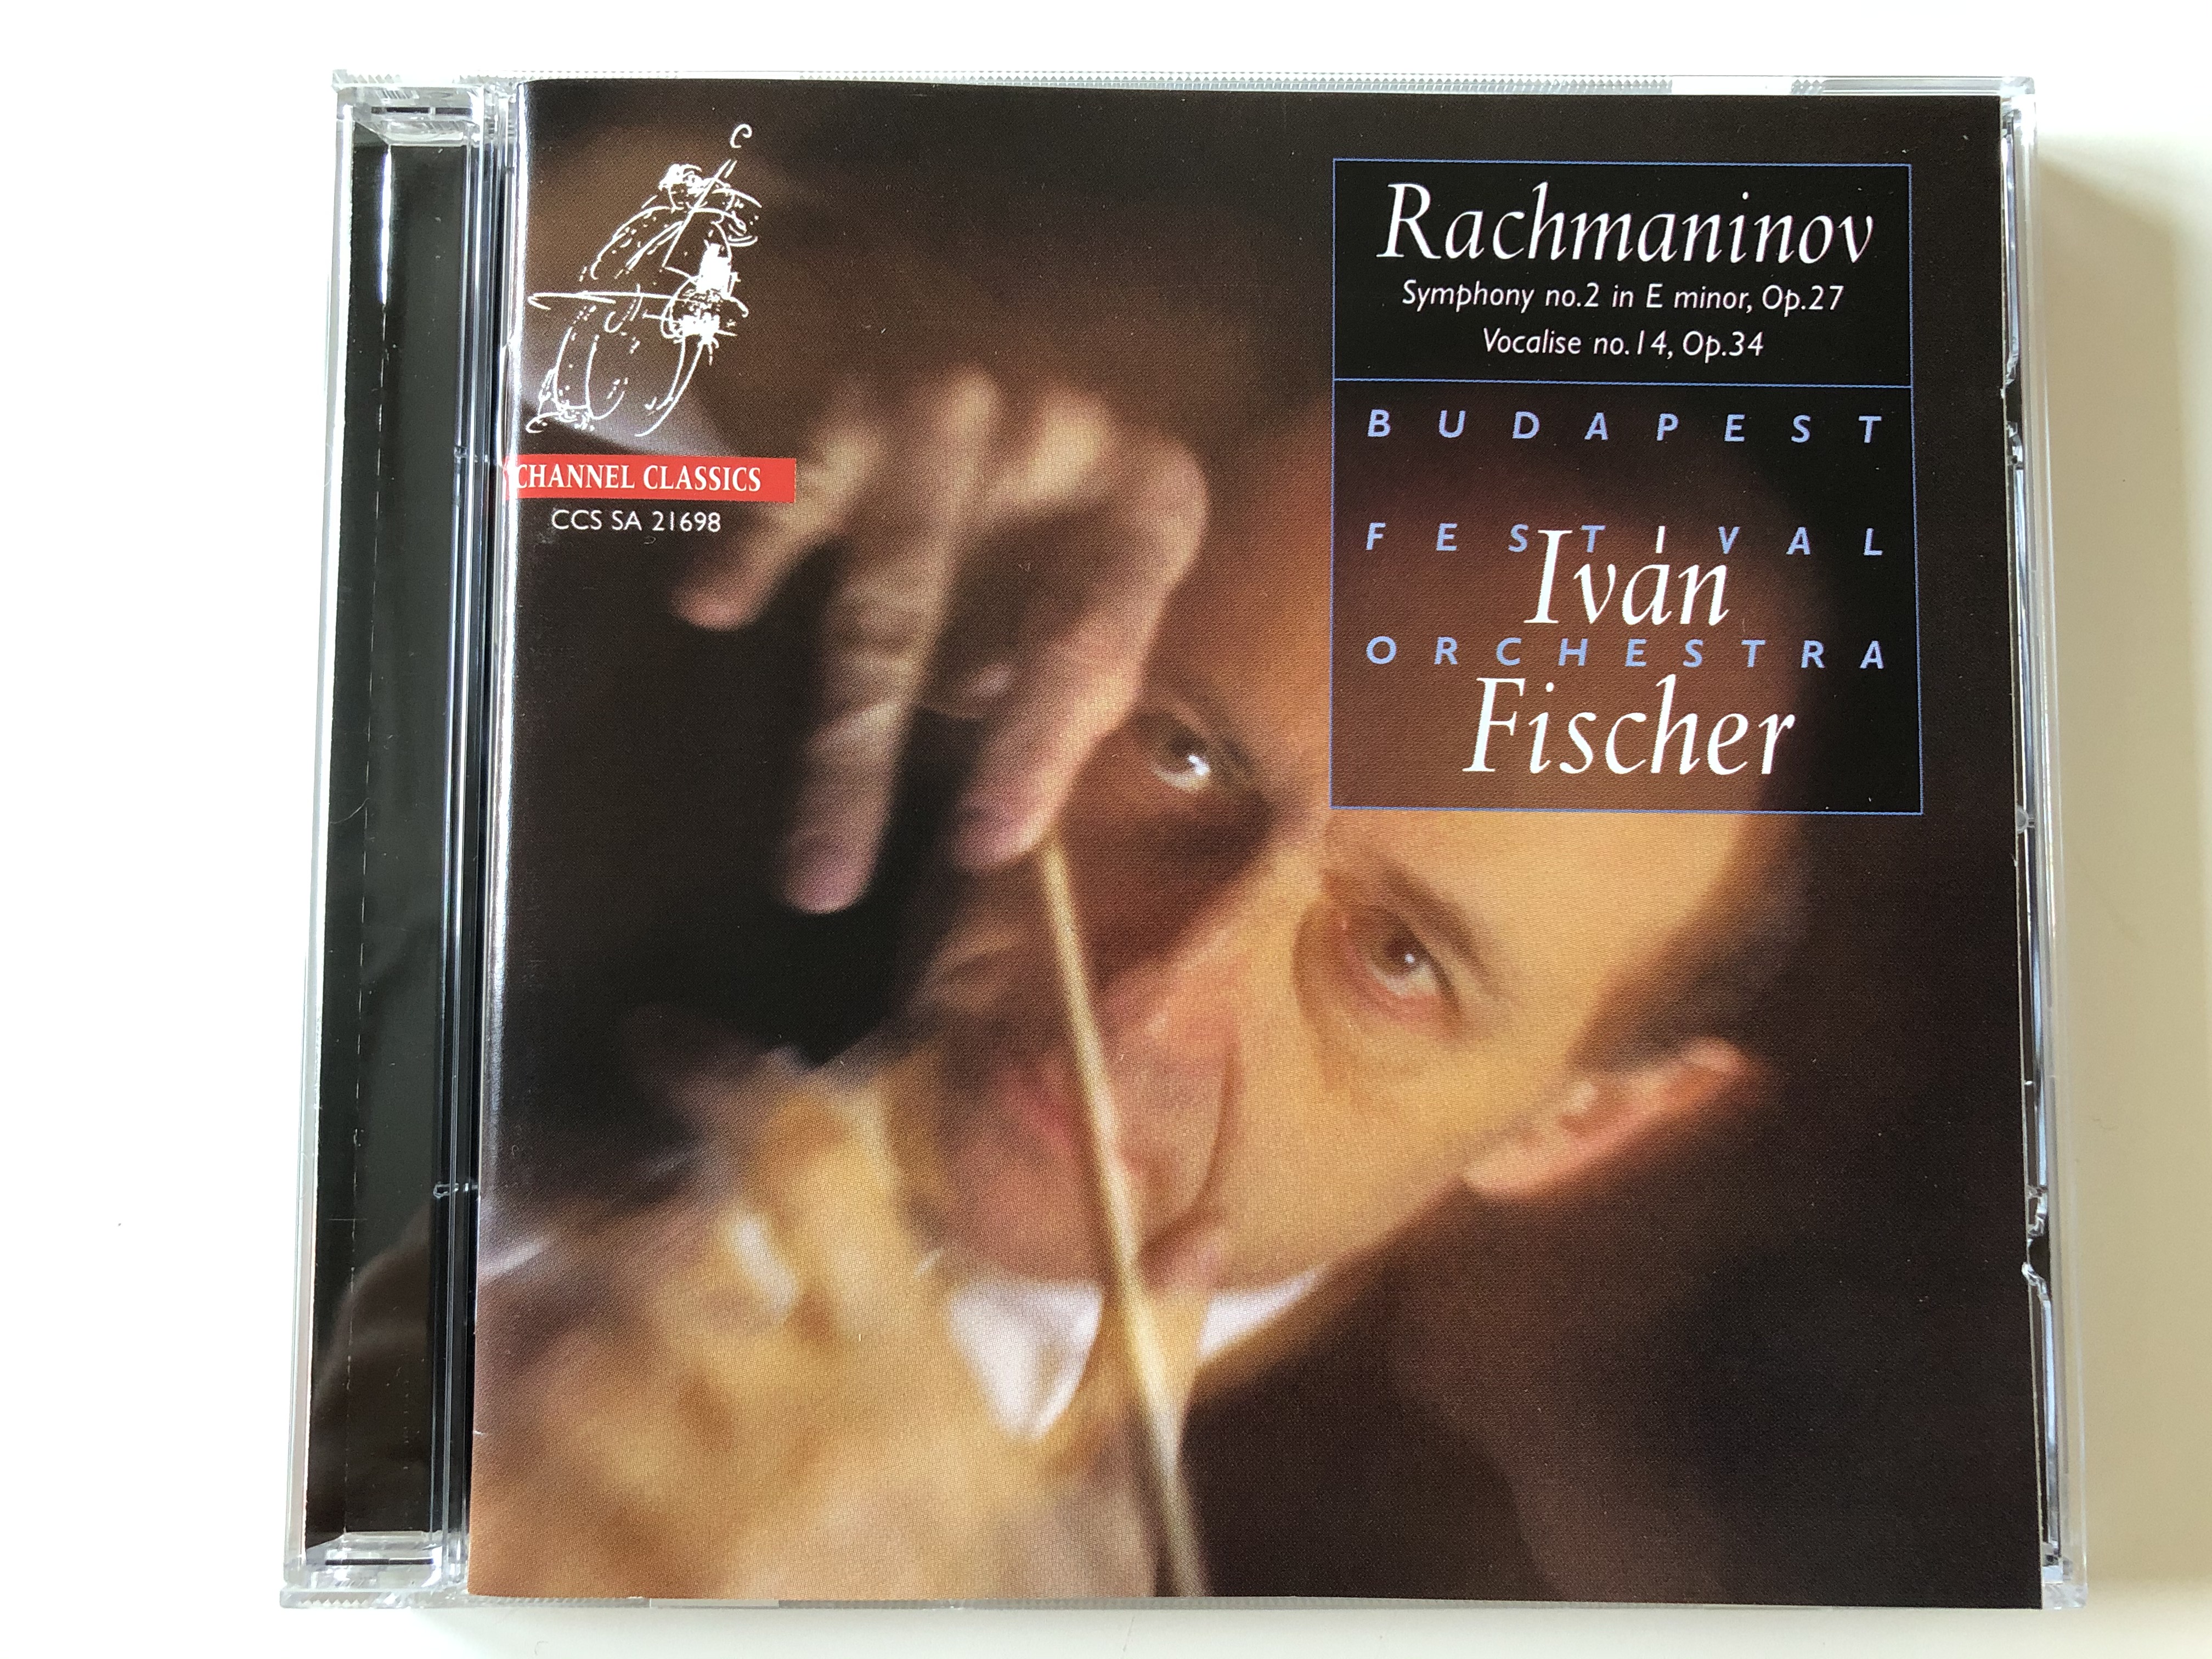 rachmaninov-symphony-no.-2-in-e-minor-op.-27-vocalise-no.-14-op.-34-iv-n-fischer-budapest-festival-orchestra-channel-classics-audio-cd-2004-ccs-sa-21698-1-.jpg